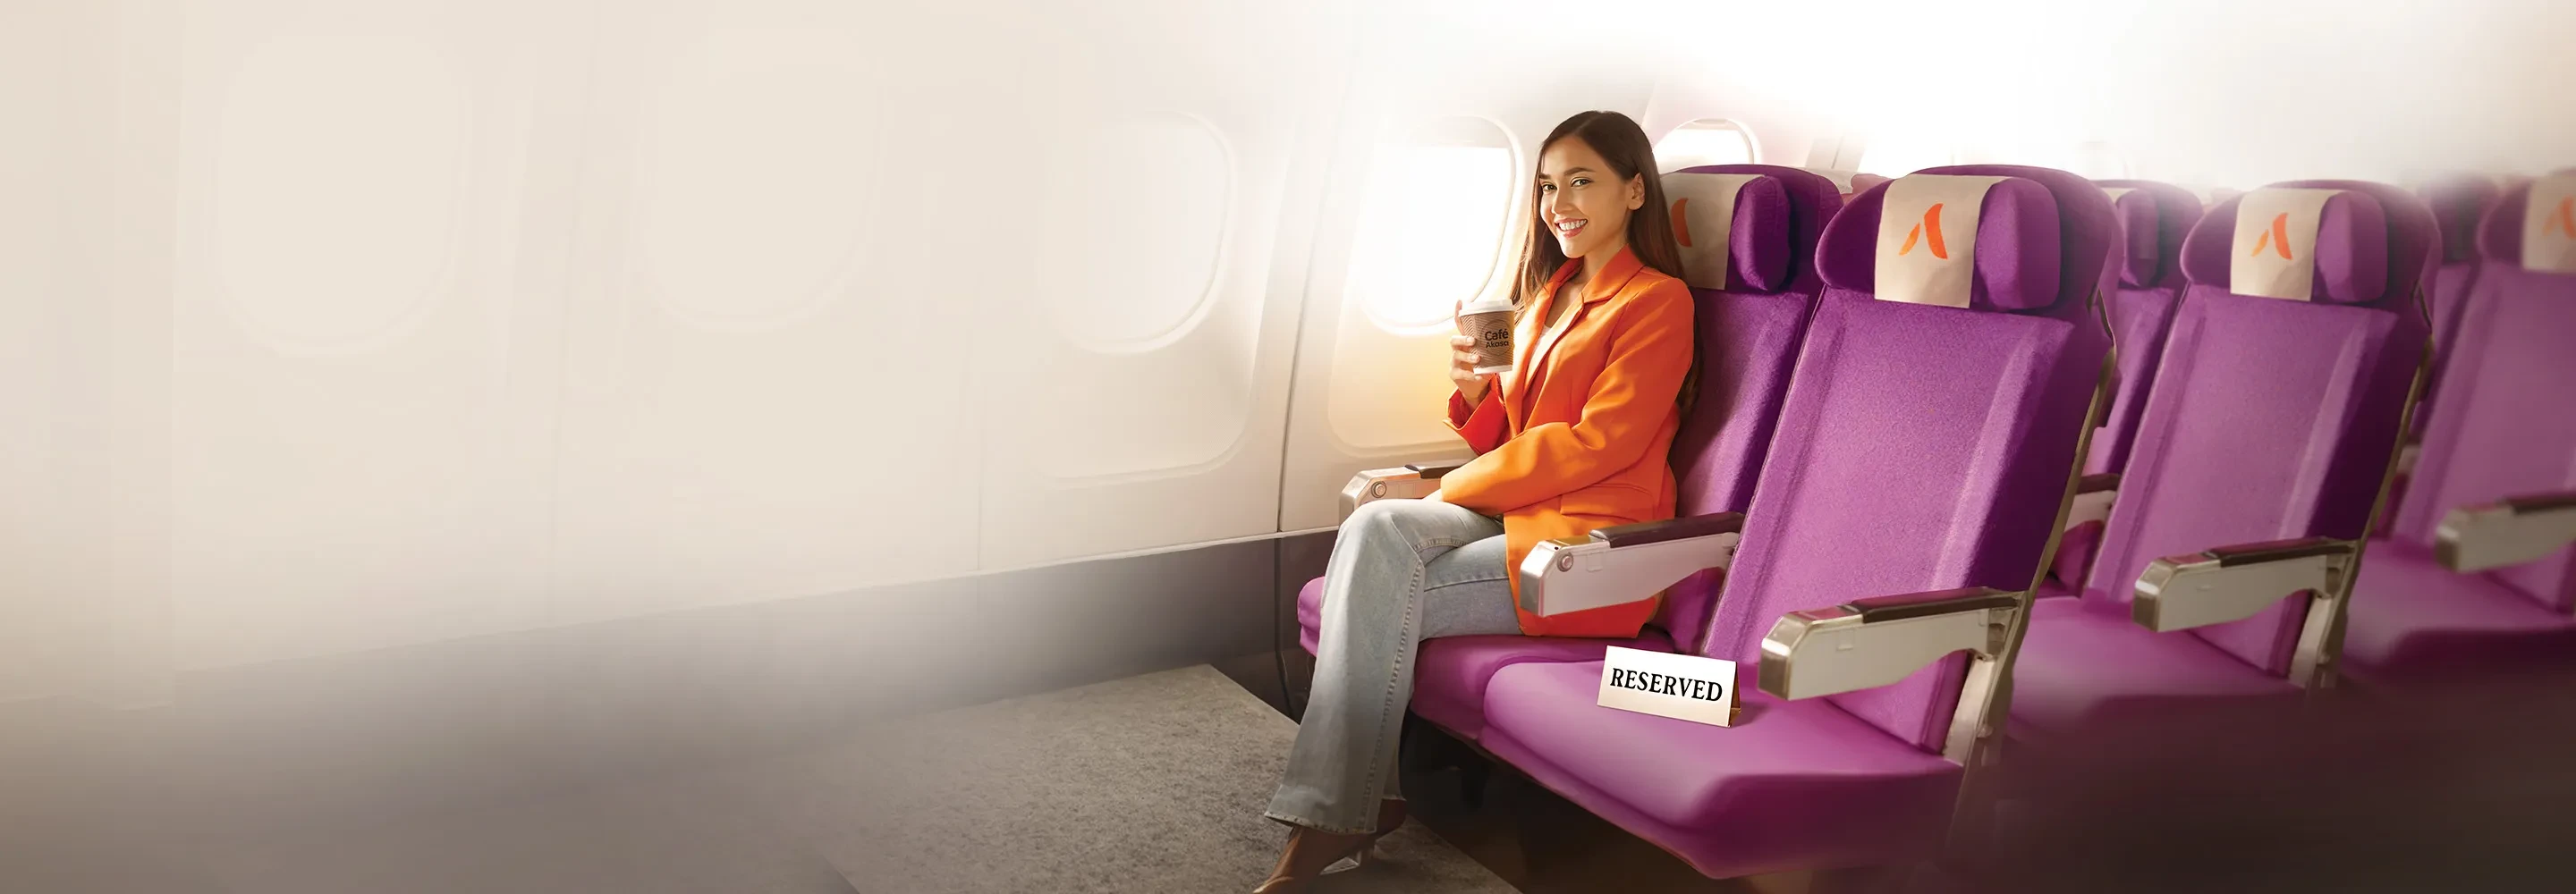 Introducing our new product - Extra Seat where you can book an extra seat for extra comfort on your flight. Click to know more.